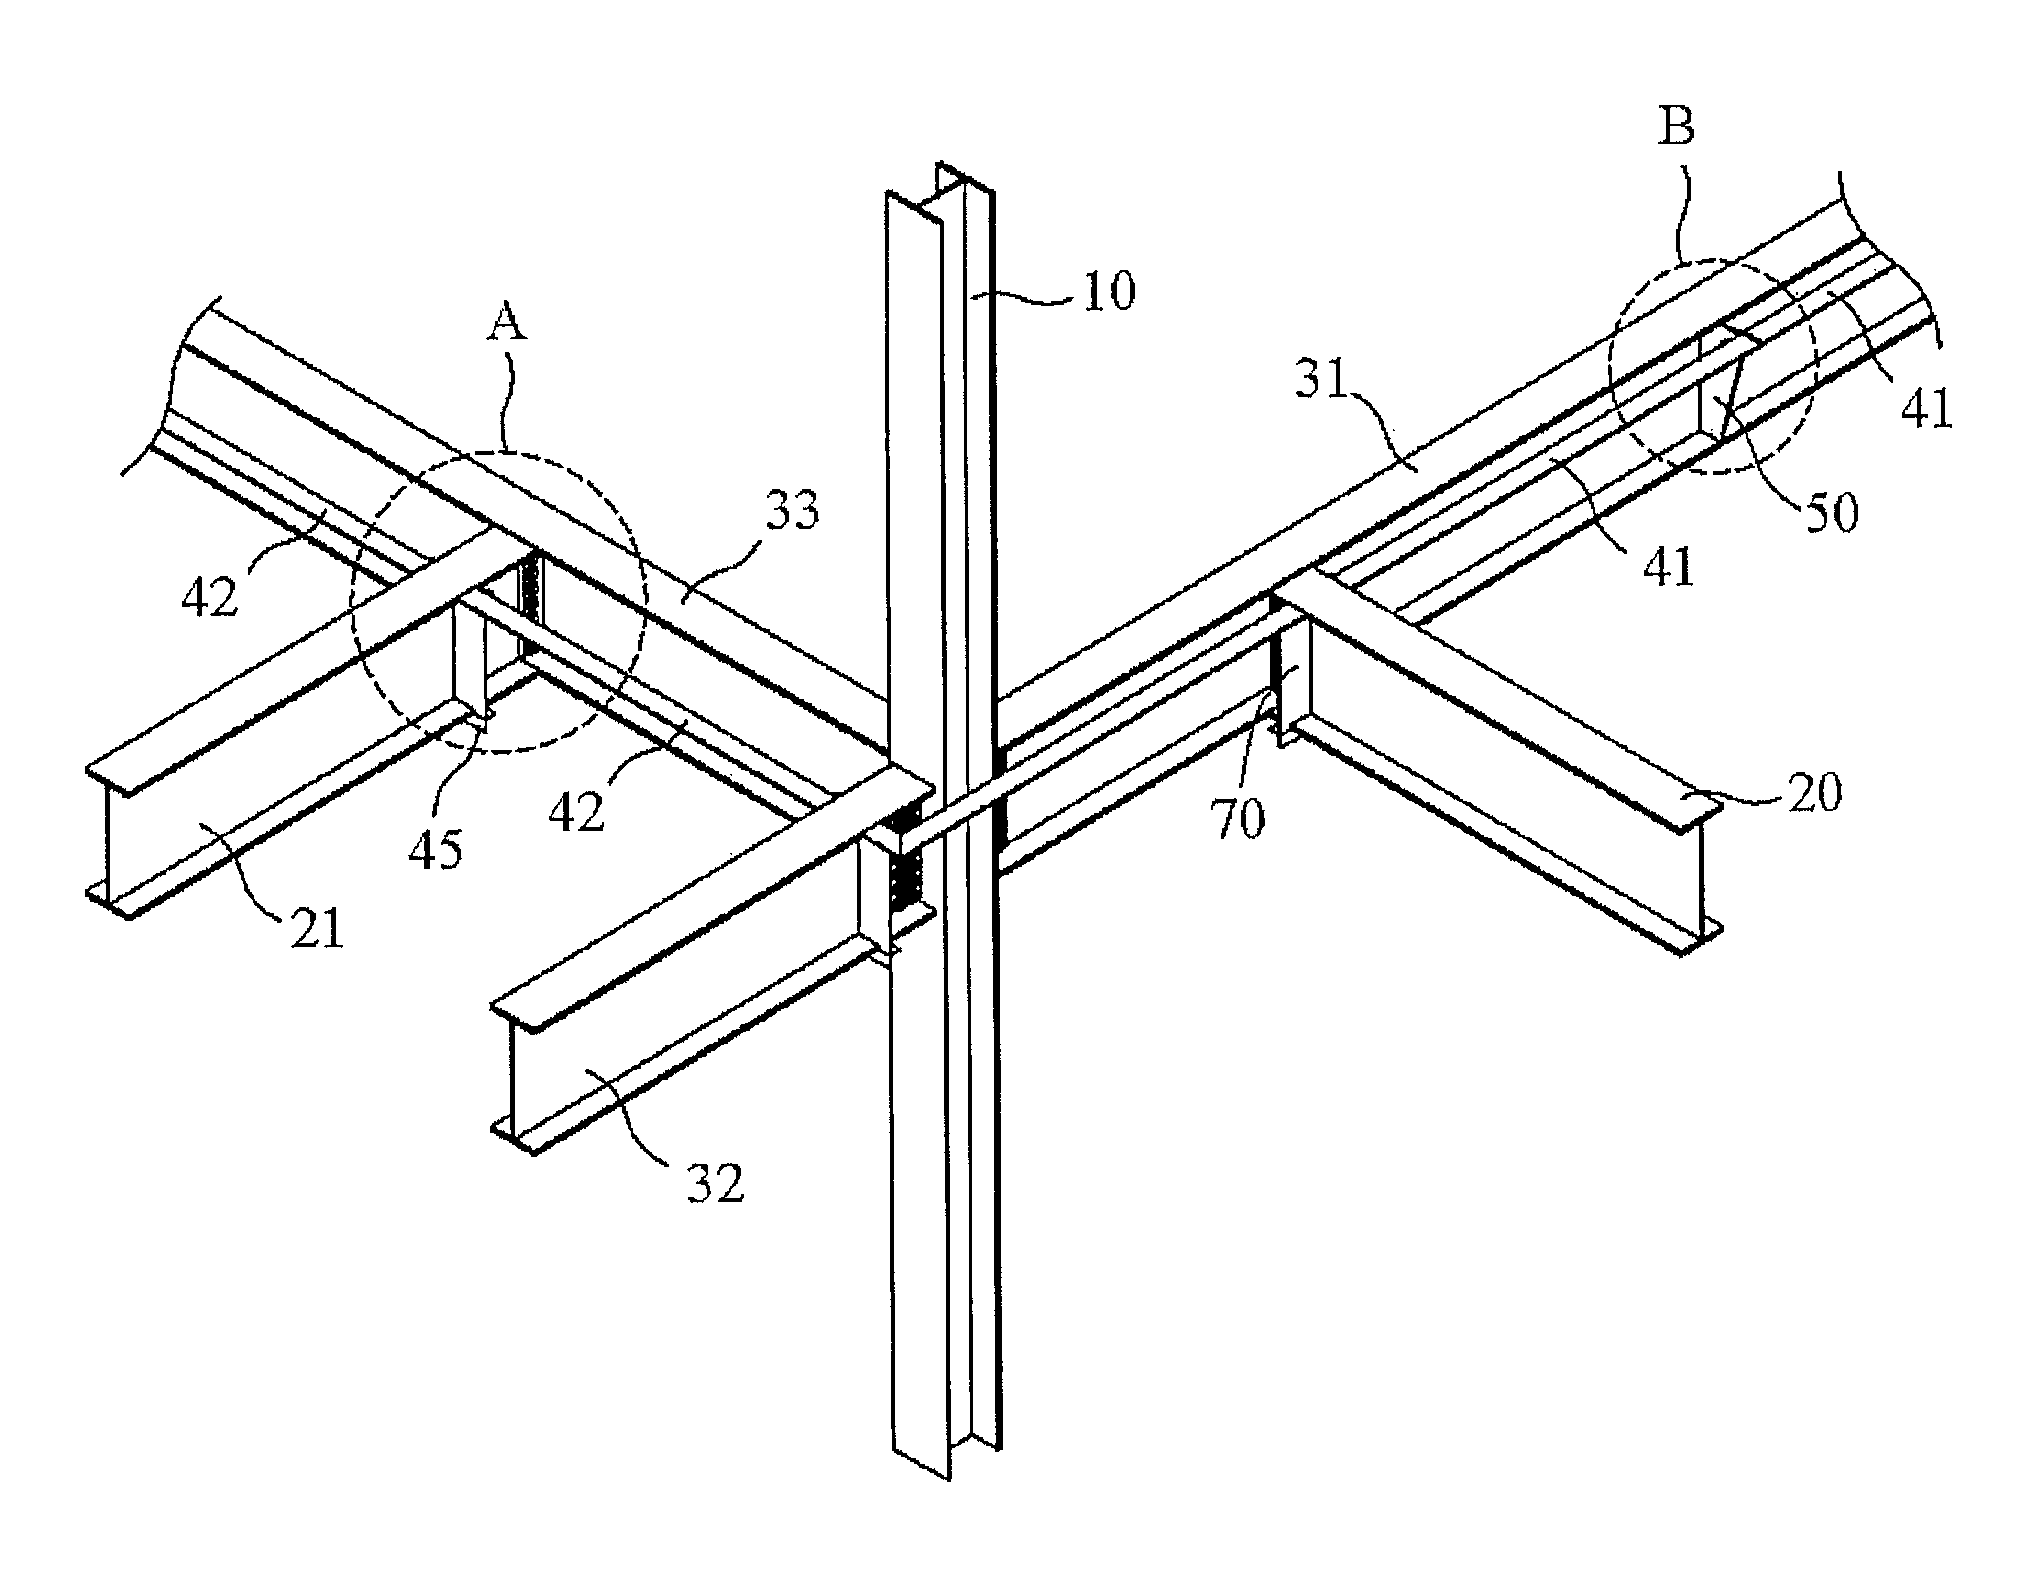 Structure for constructing a high-rise building having a reinforced concrete structure including a steel frame